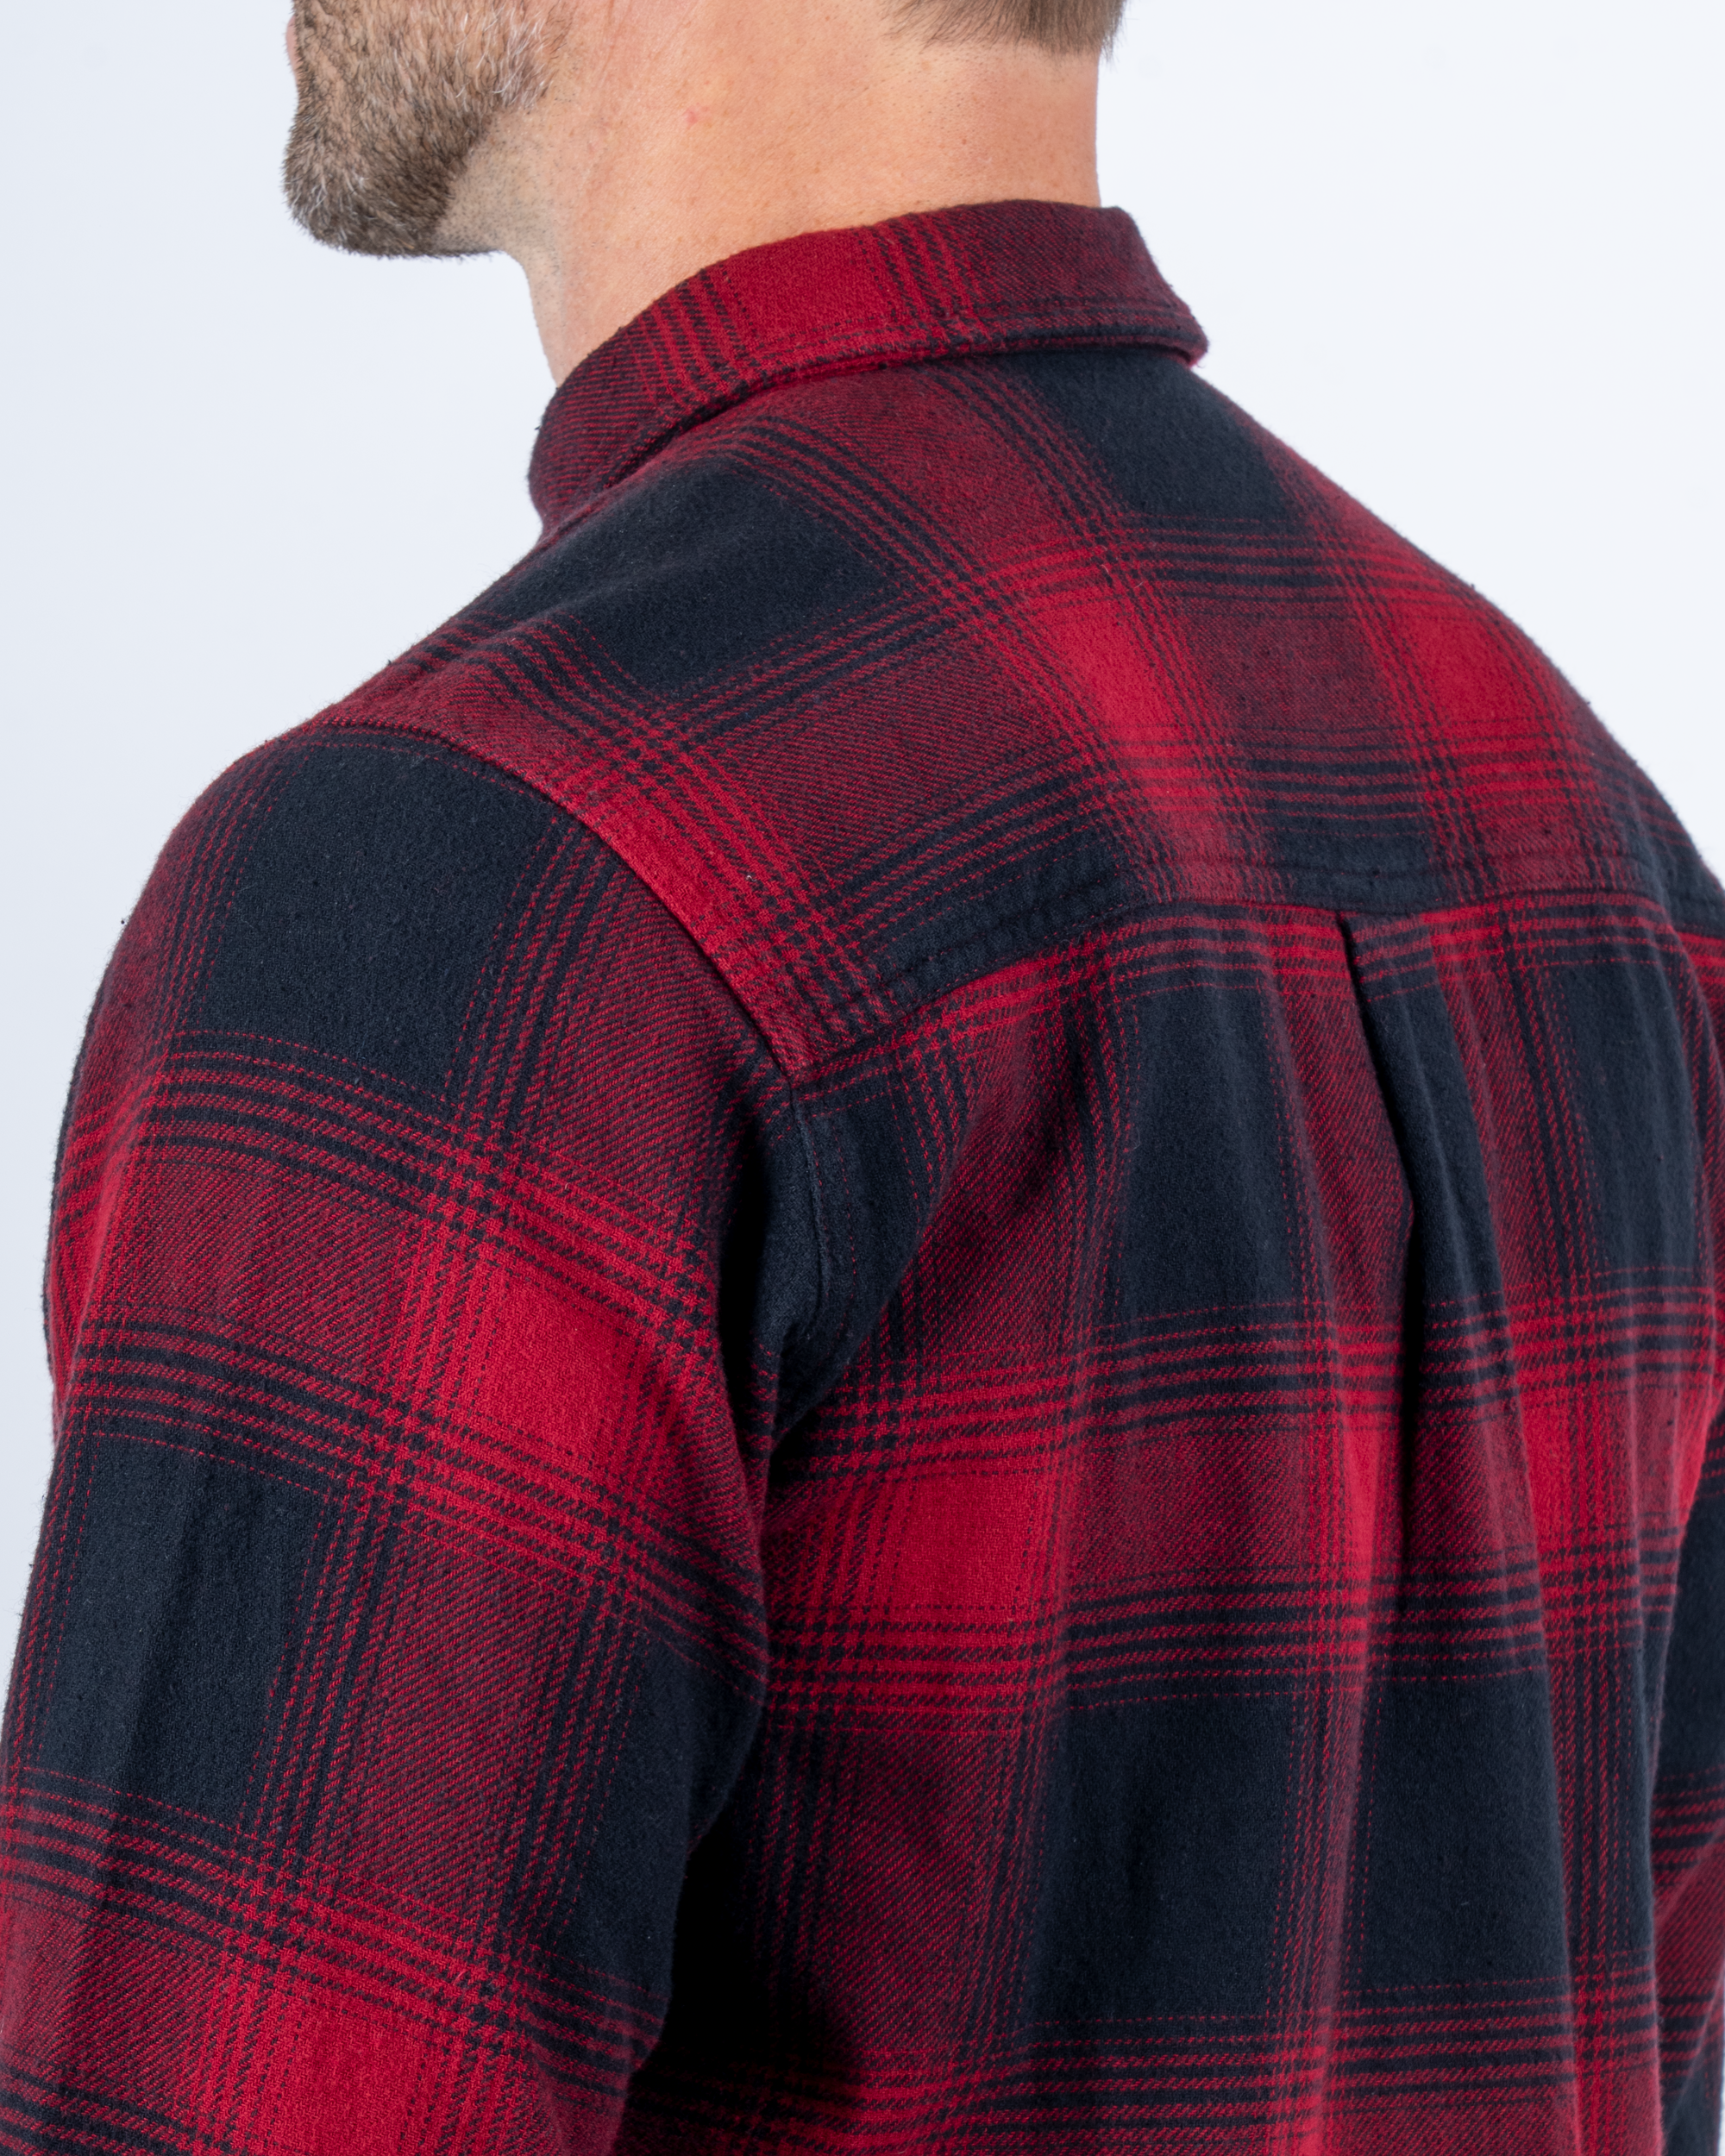 Foreign Rider Co Organic Cotton Red Flannel Plaid Long Sleeve Button Up Shirt Back Shoulder and Collar Detail